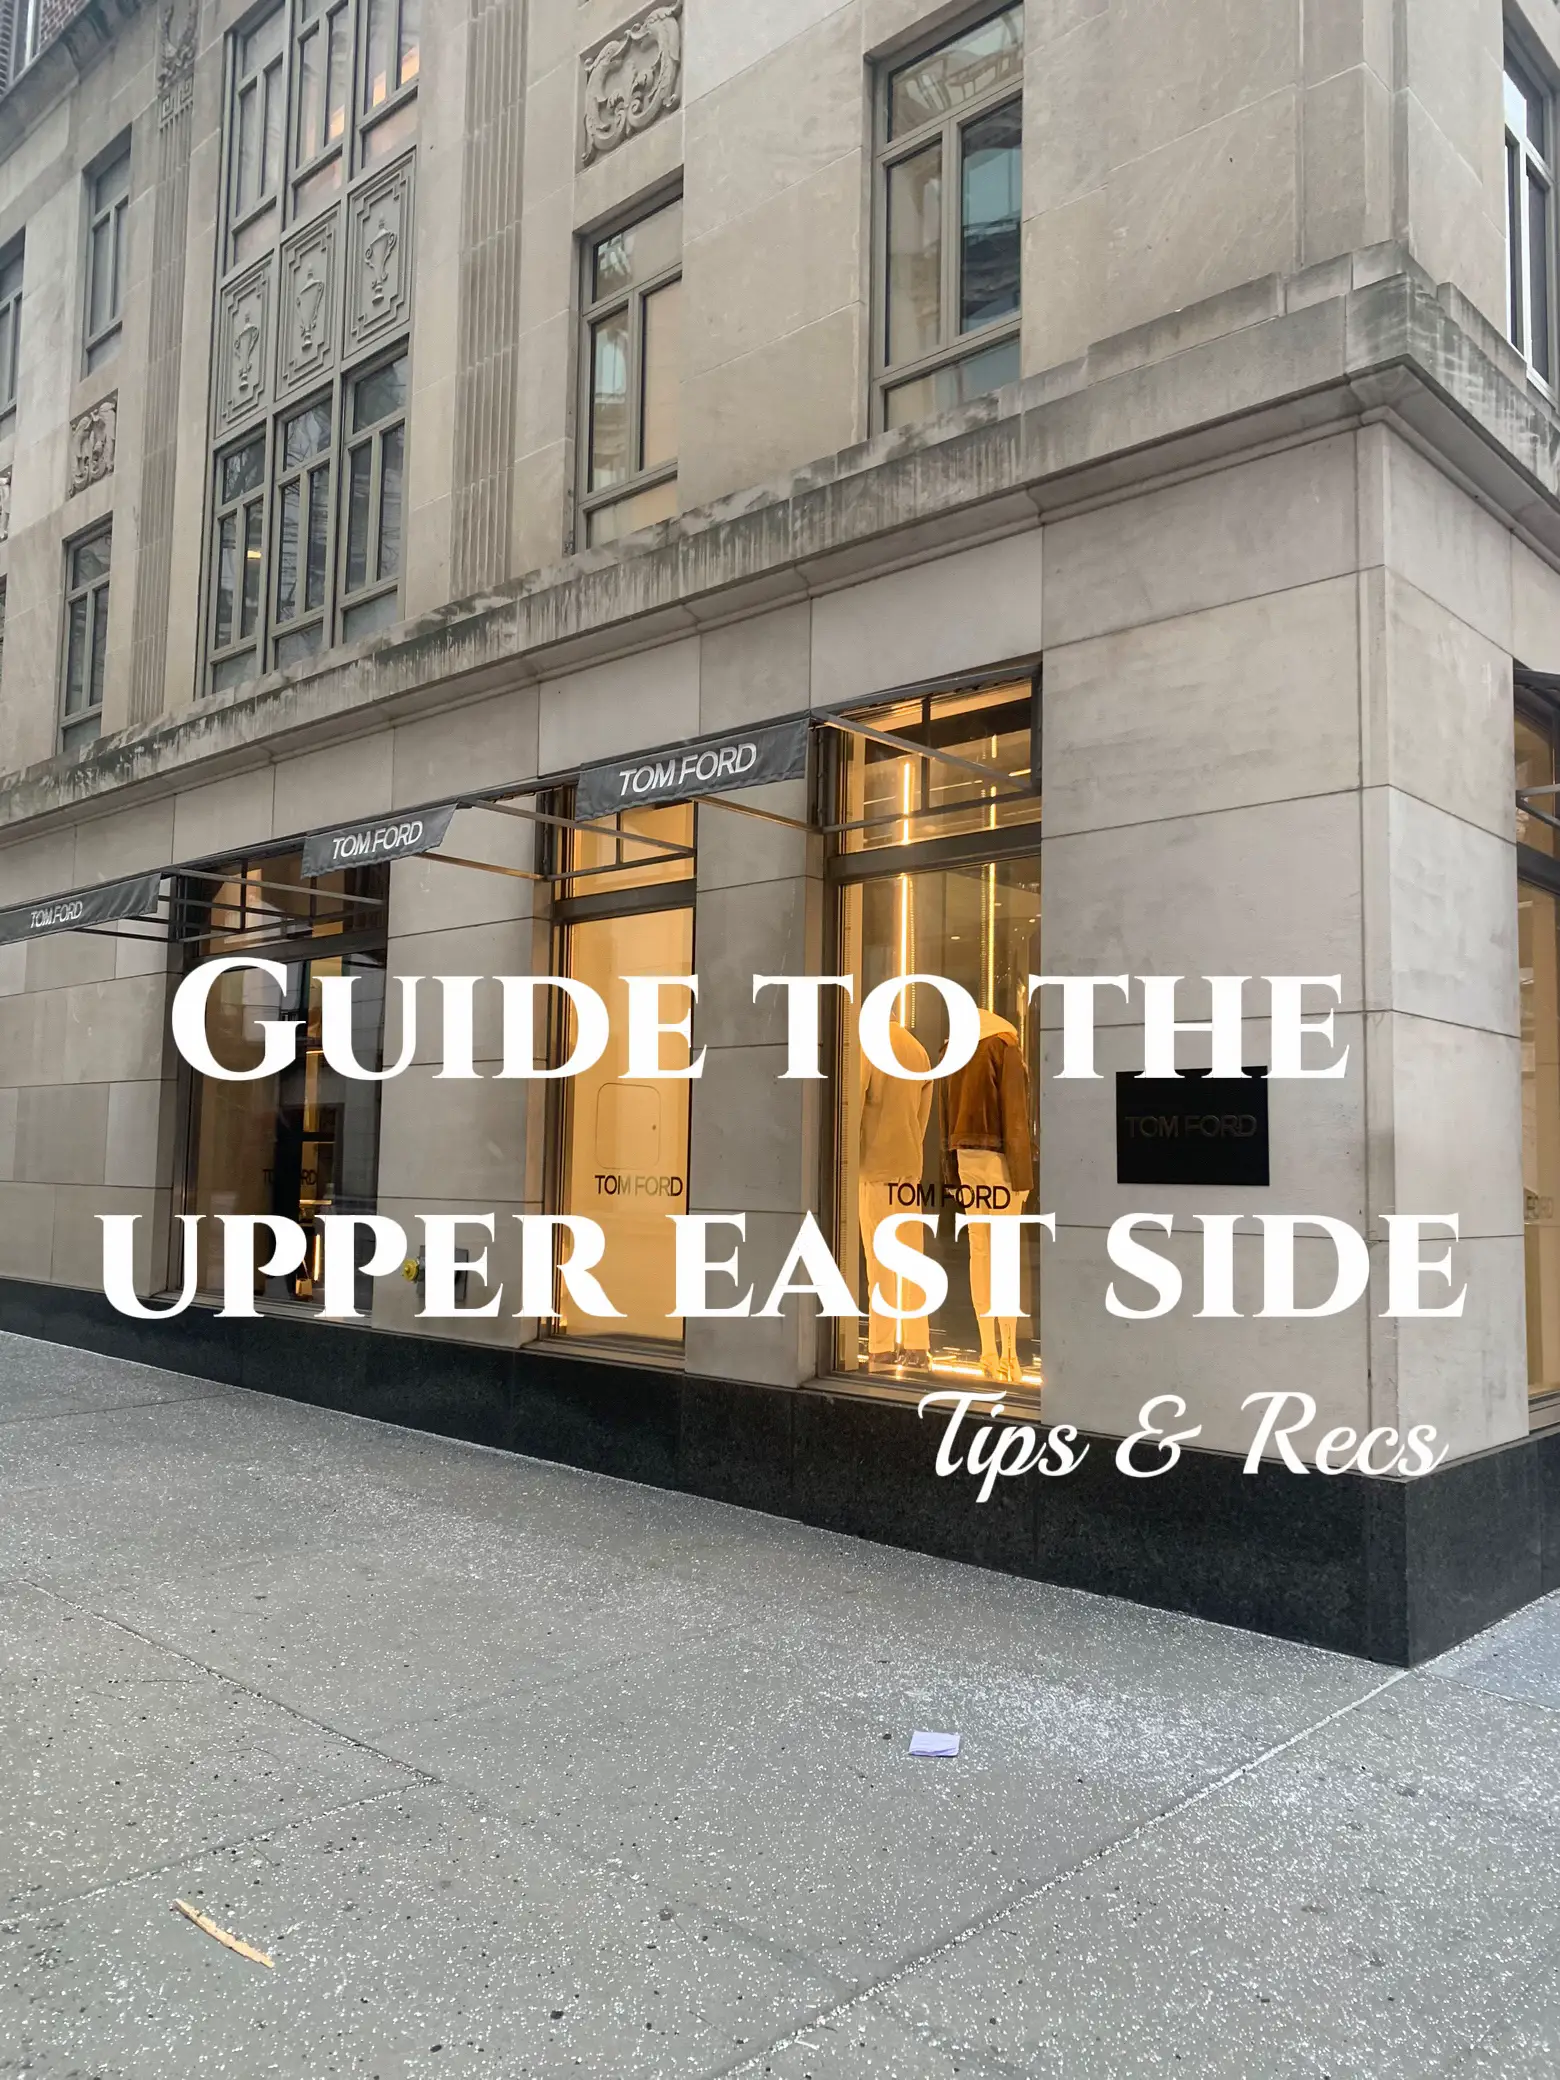  A white building with a sign that says "Guide to the Tom Ford Uppera East Side".